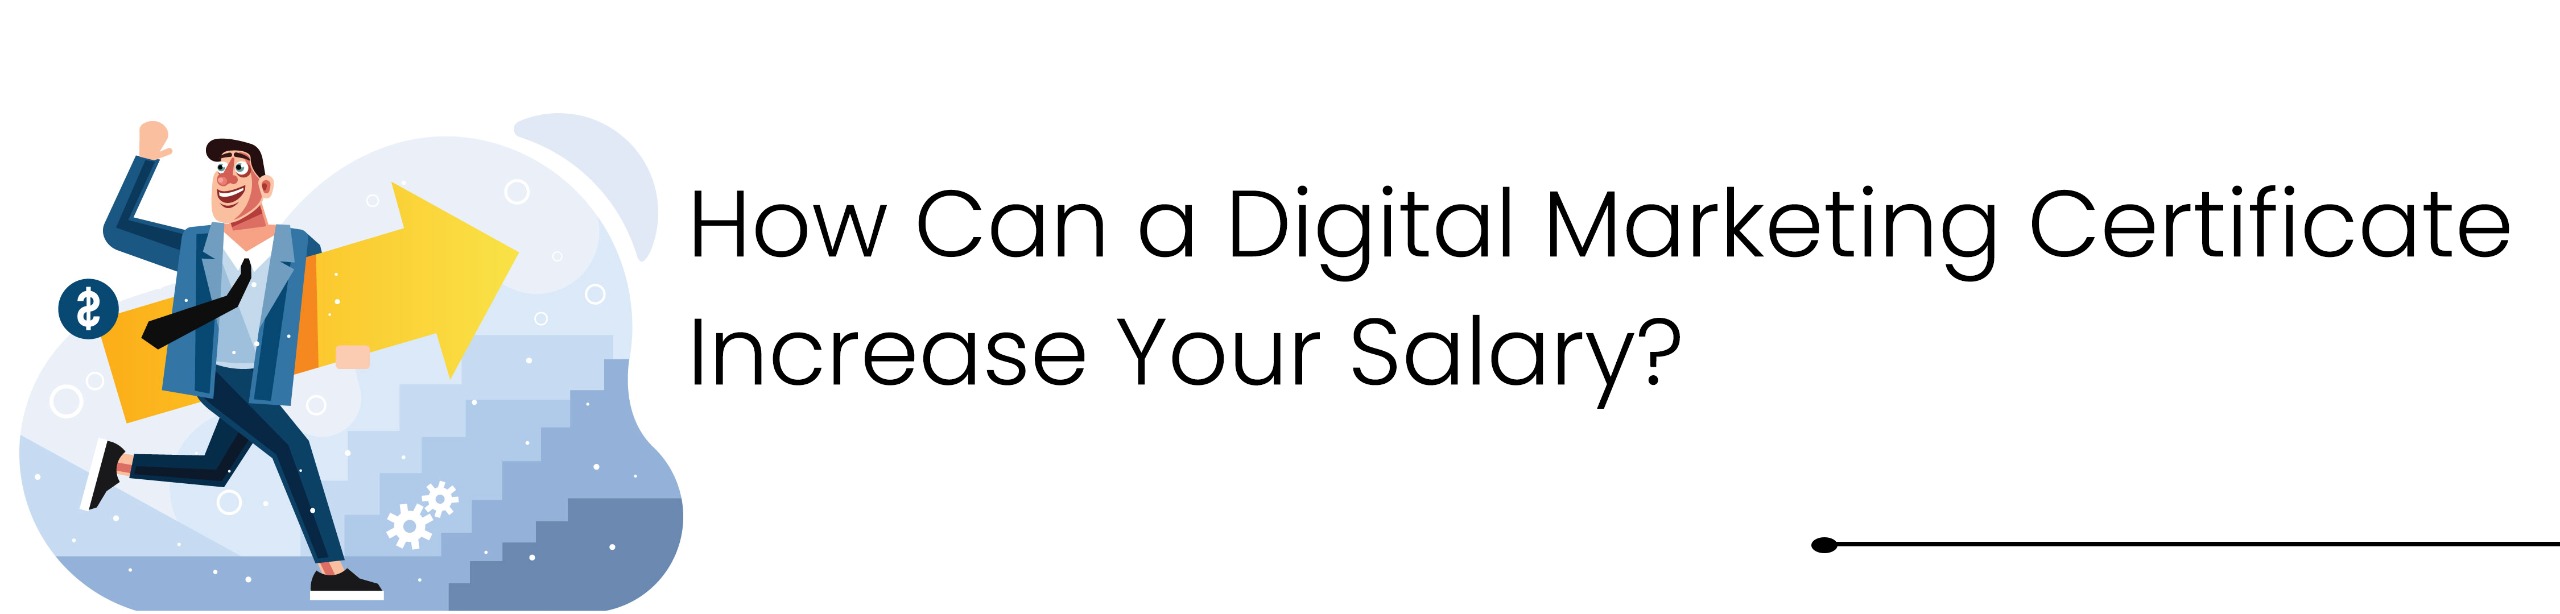 Boosting Your Income: How Can a Digital Marketing Certificate Increase Your Salary?